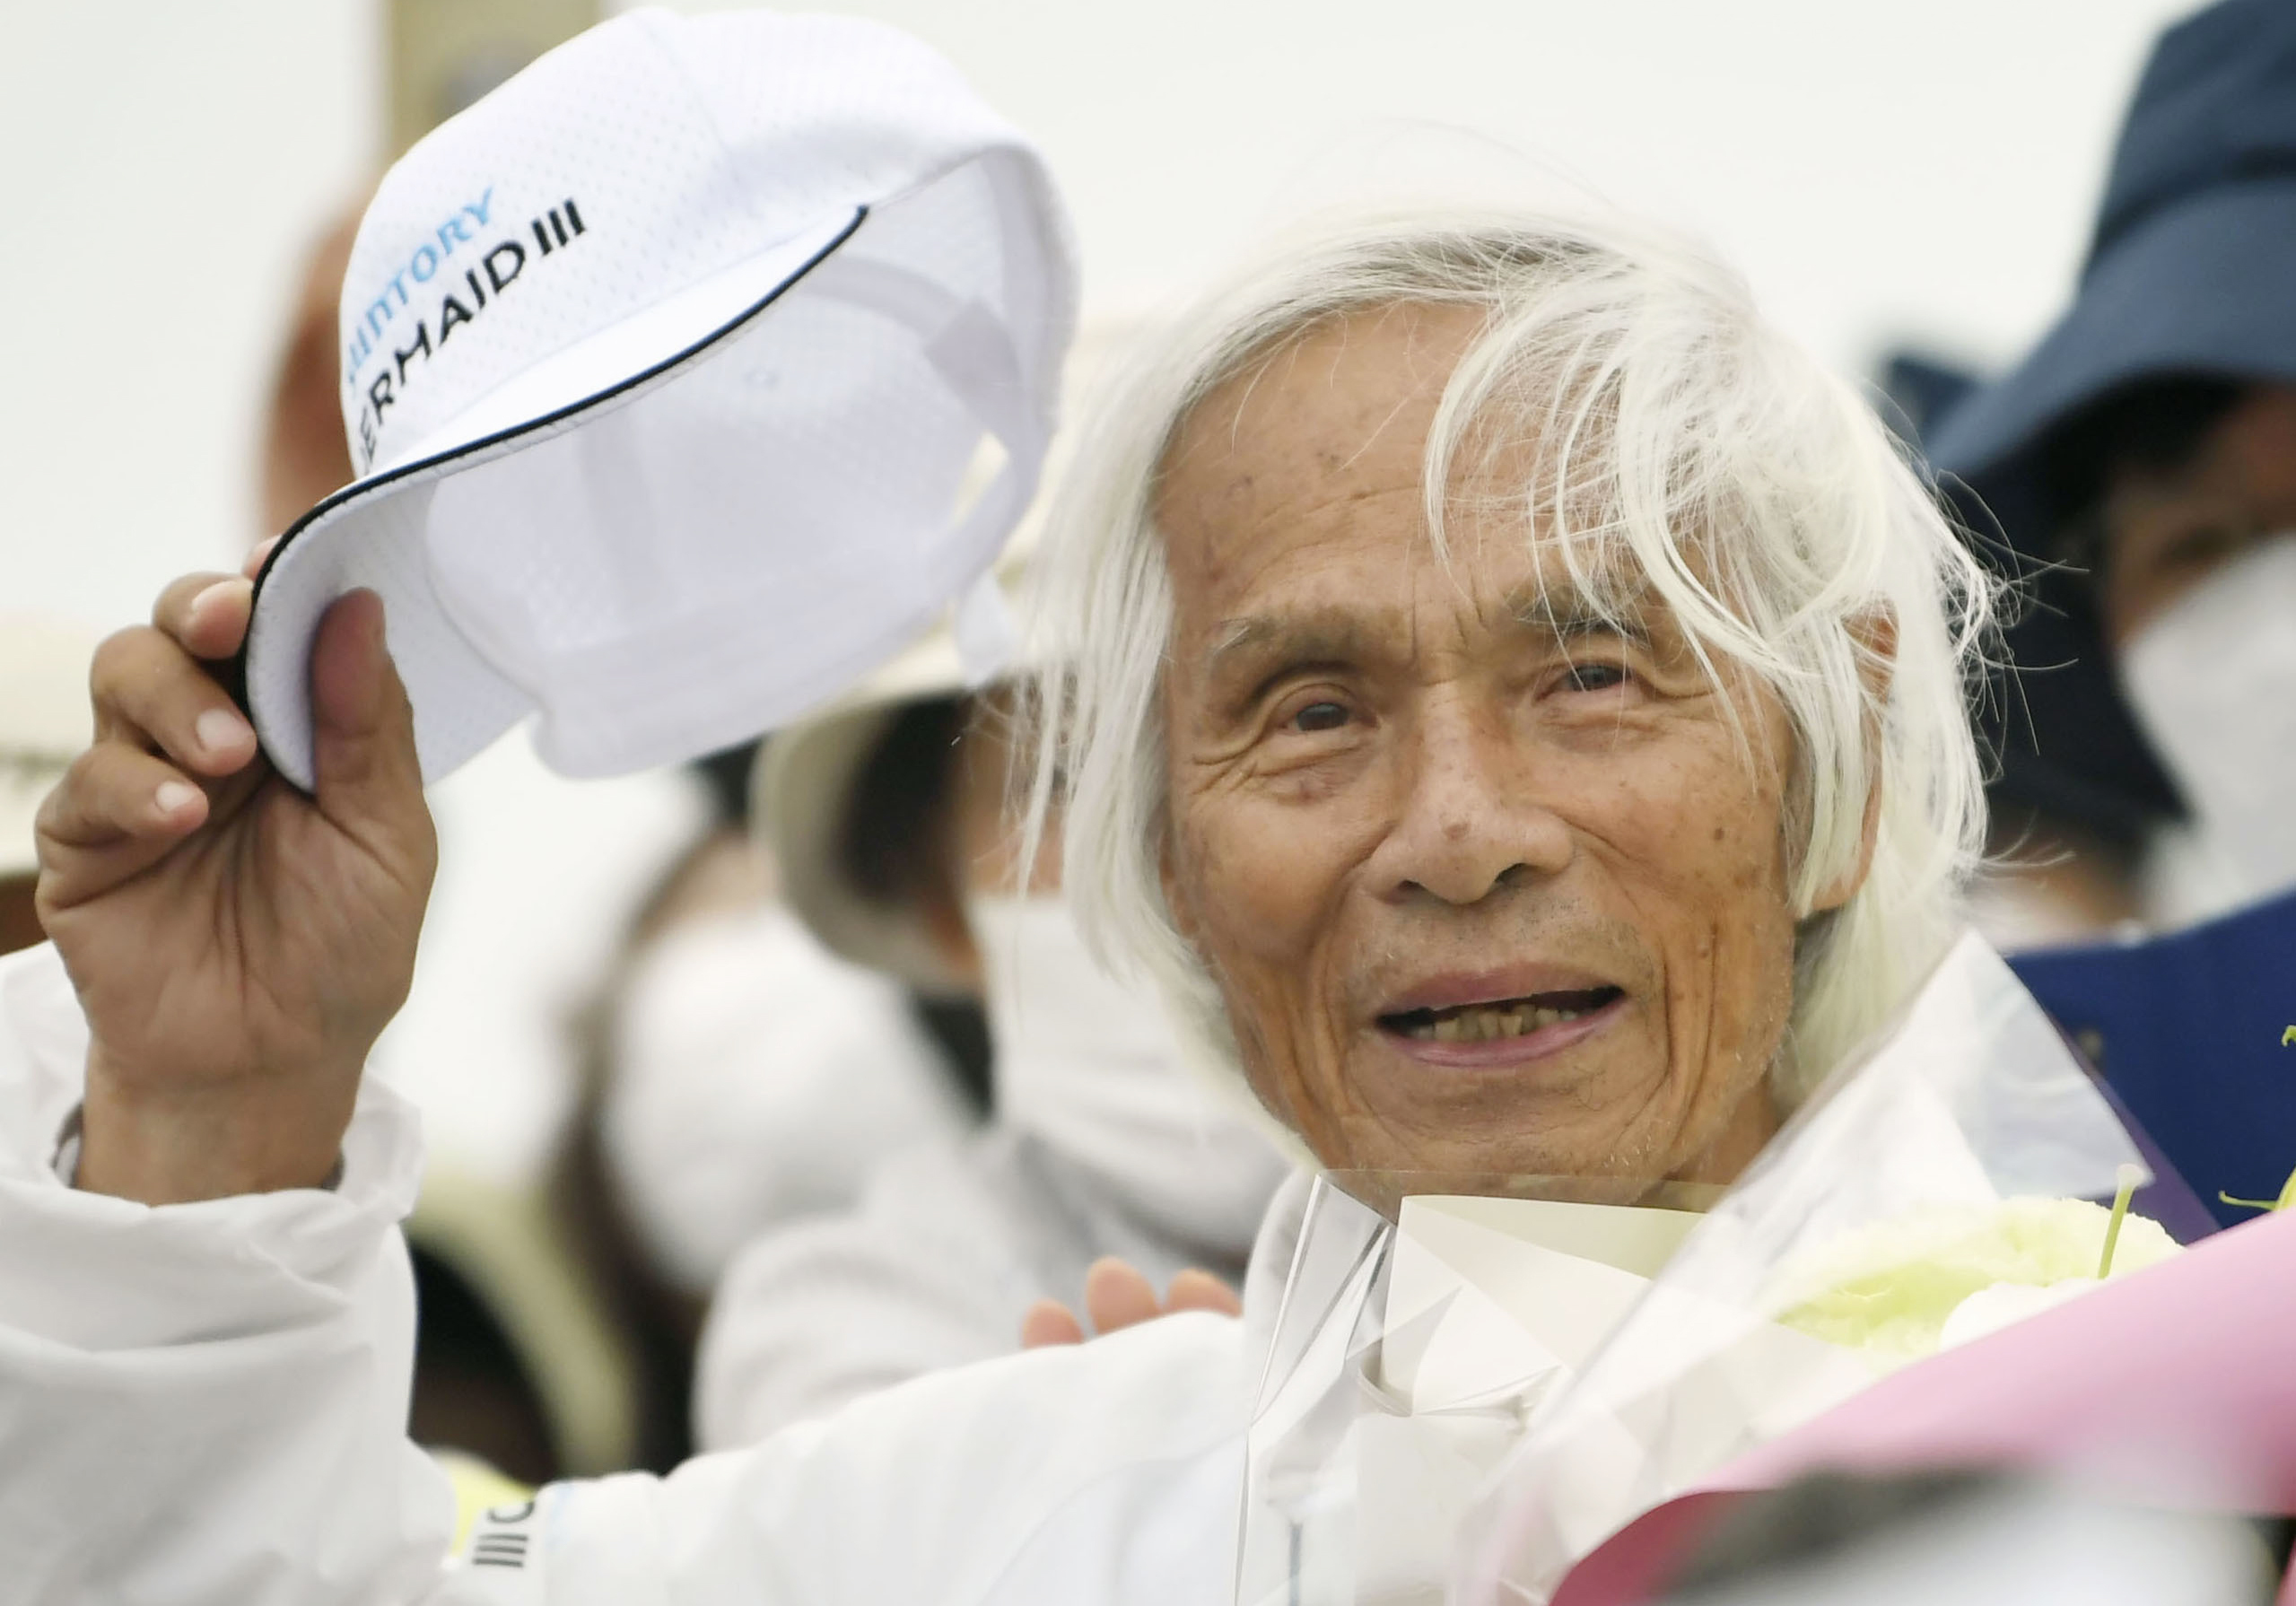 Japanese Kenichi Horie gets celebrated at a yacht harbor in Nishinomiya, western Japan, Sunday, June 5, 2022, after he completed his solo nonstop voyage across the Pacific Saturday. Horie’s return to Japan, after leaving San Francisco in March, made him the world’s oldest person to complete a solo, nonstop crossing of the Pacific, according to his sponsors. (Kosuke Moriwaki/Kyodo News via AP)